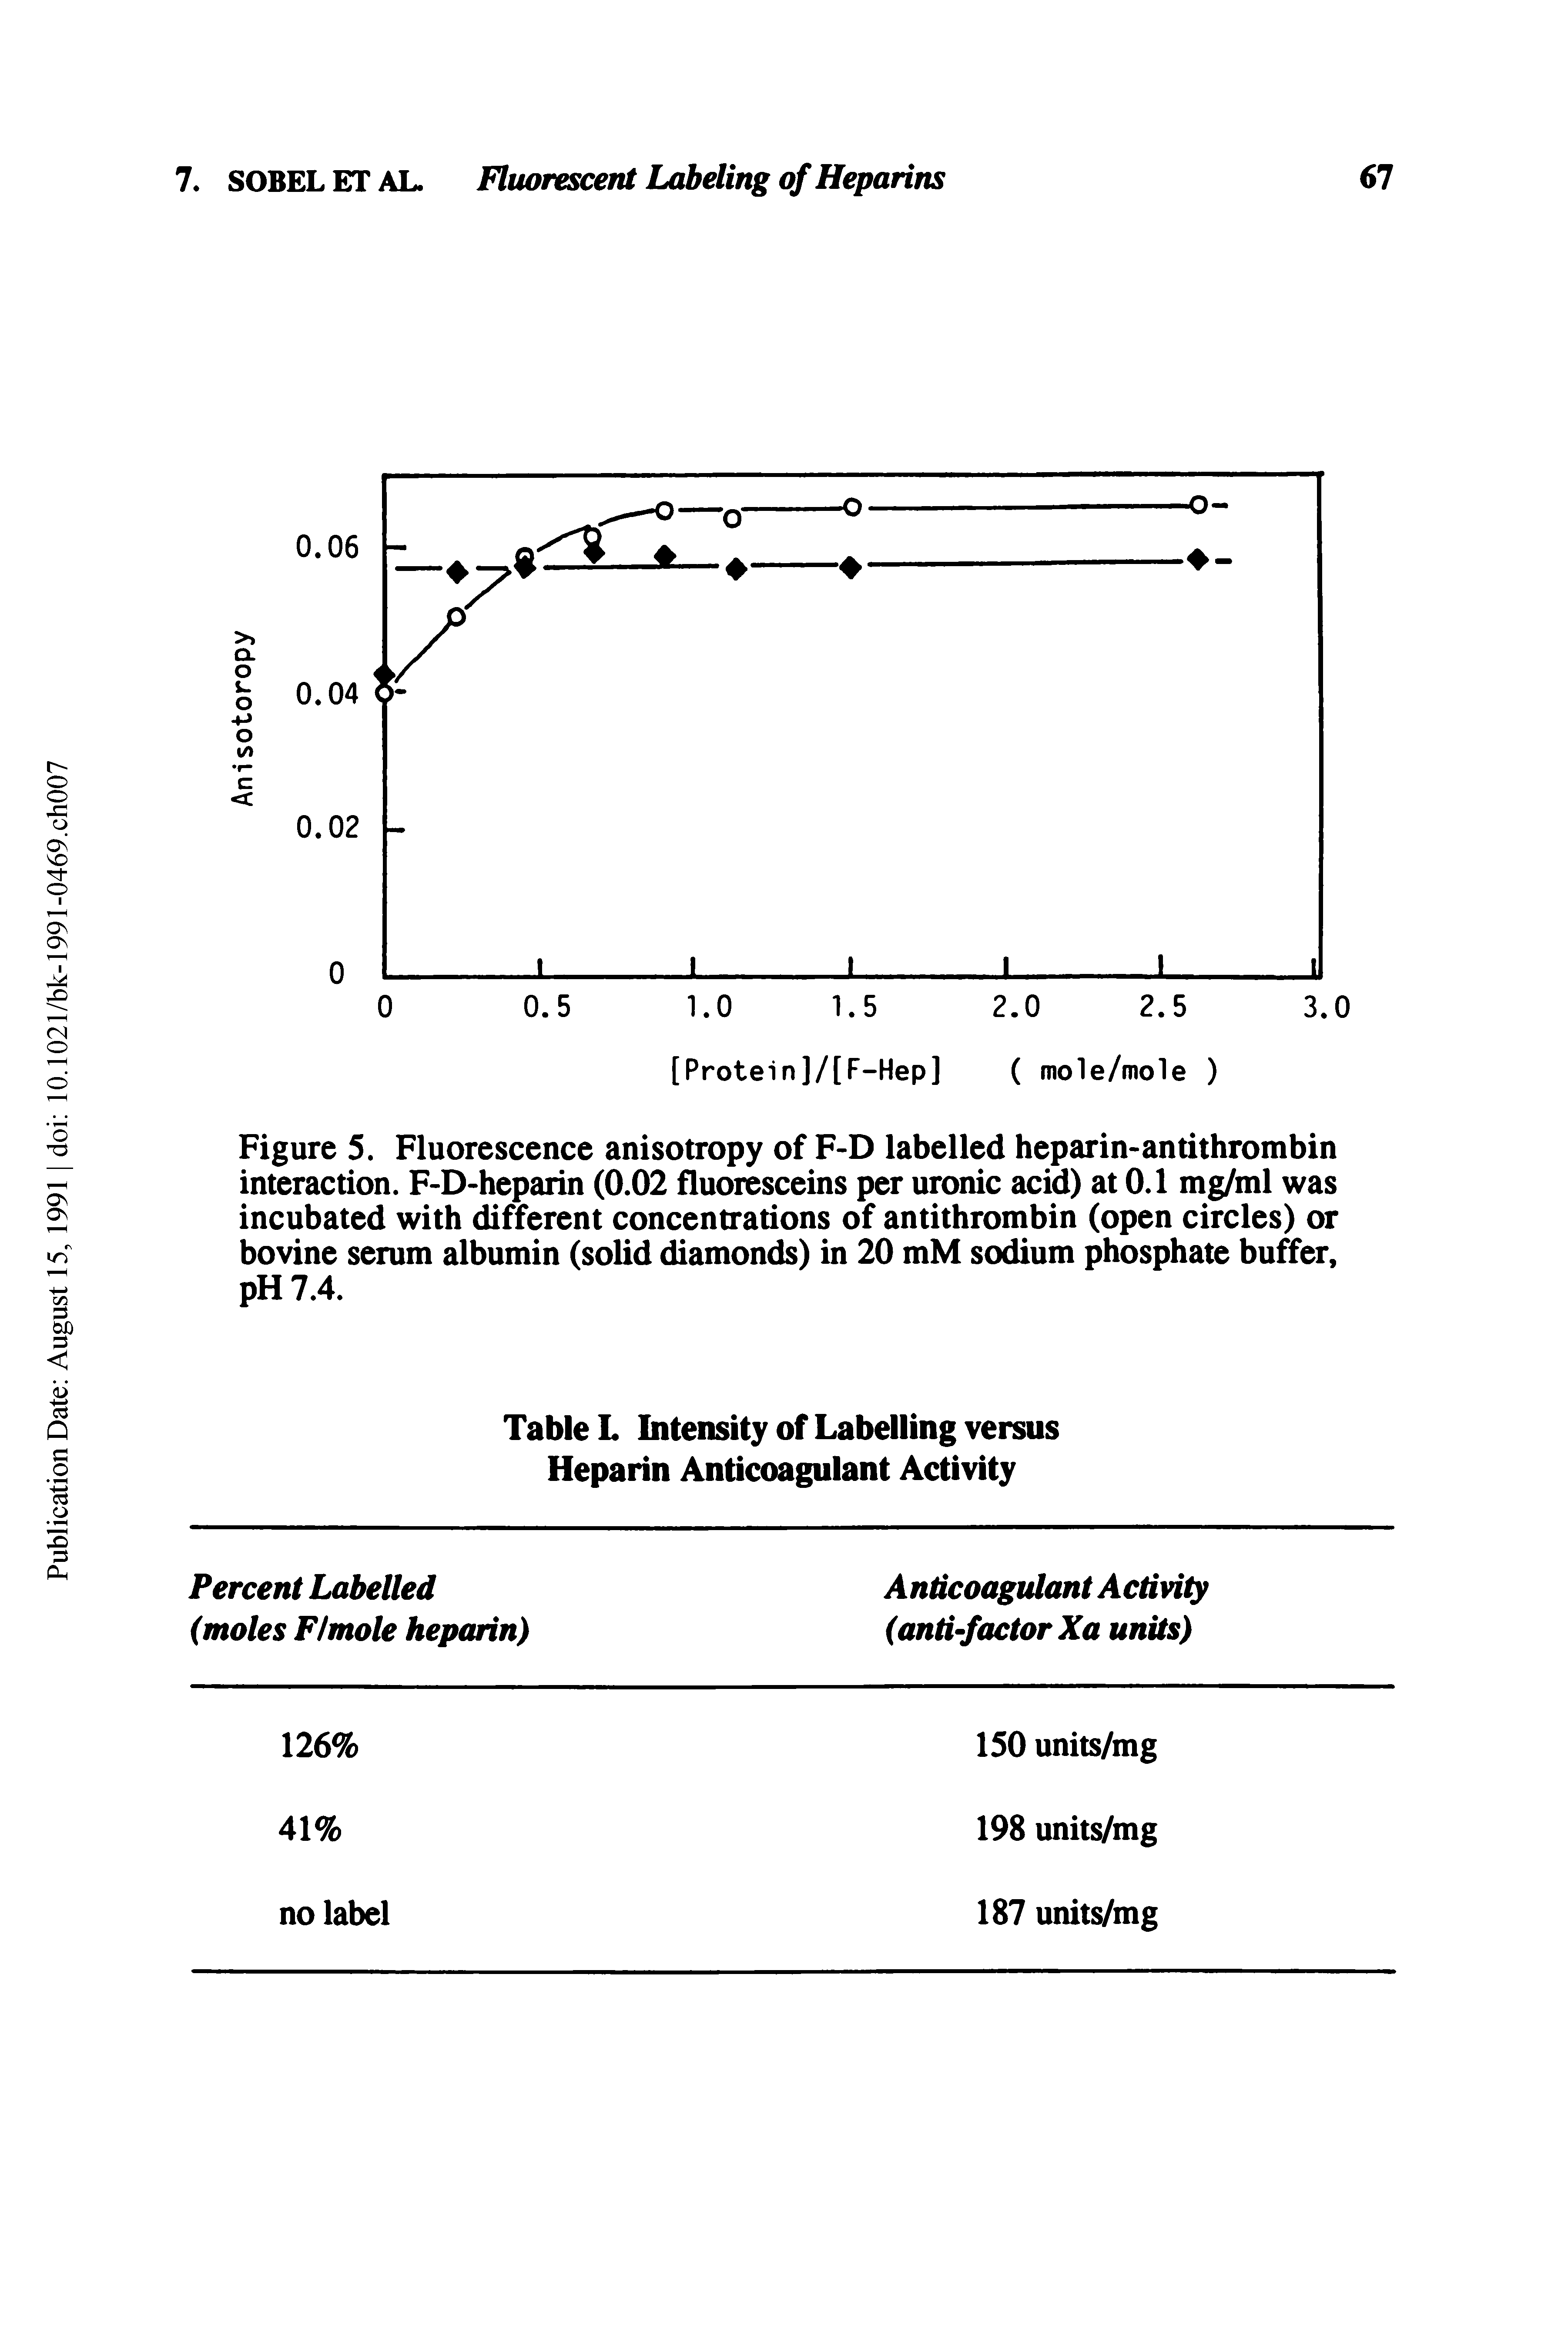 Figure 5. Fluorescence anisotropy of F-D labelled heparin-antithrombin interaction. F-D-heparin (0.02 fluoresceins per uronic acid) at 0.1 mg/ml was incubated with different concentrations of antithrombin (open circles) or bovine serum albumin (solid diamonds) in 20 mM sodium phosphate buffer, pH 7.4.